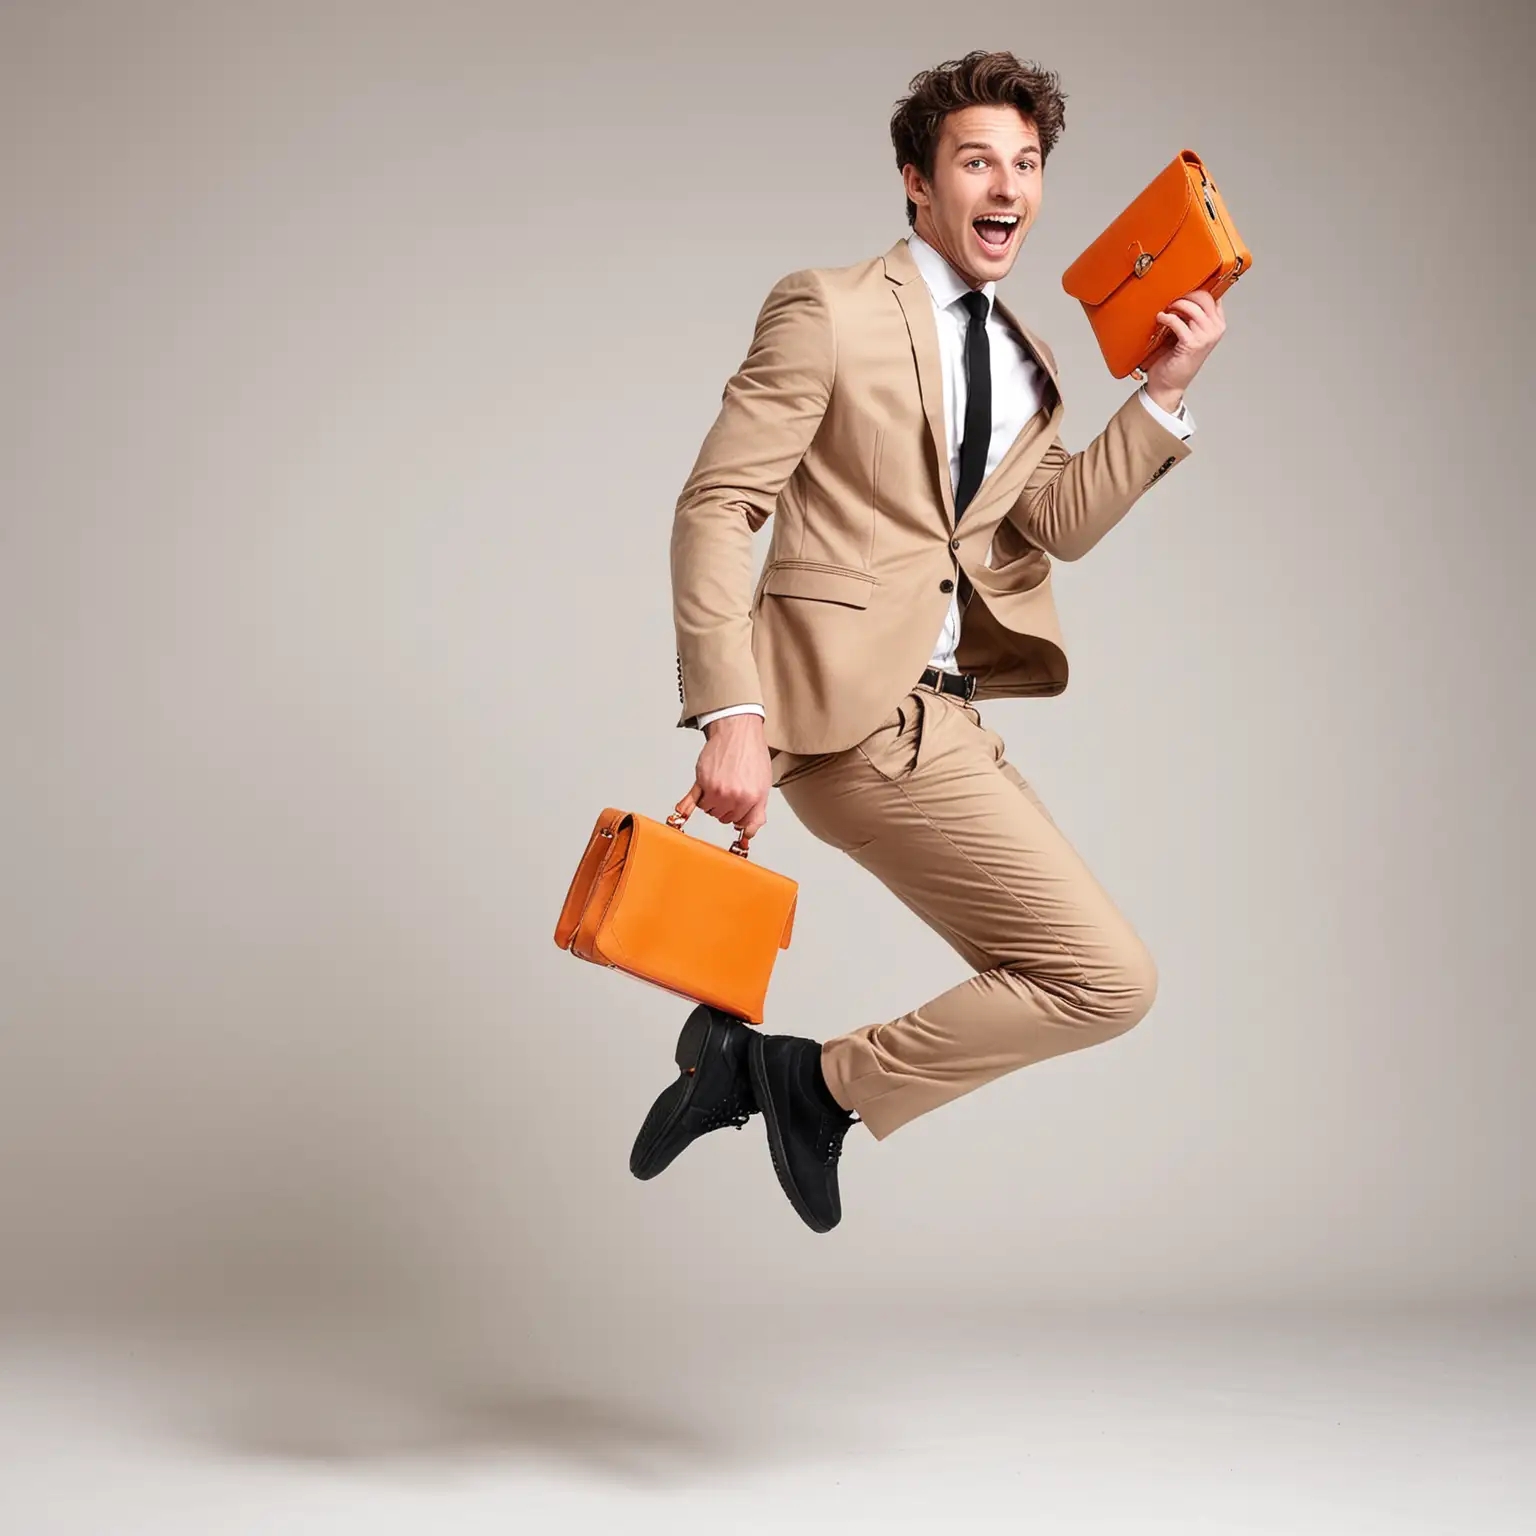 Energetic Caucasian Man Jumping with Orange Briefcase